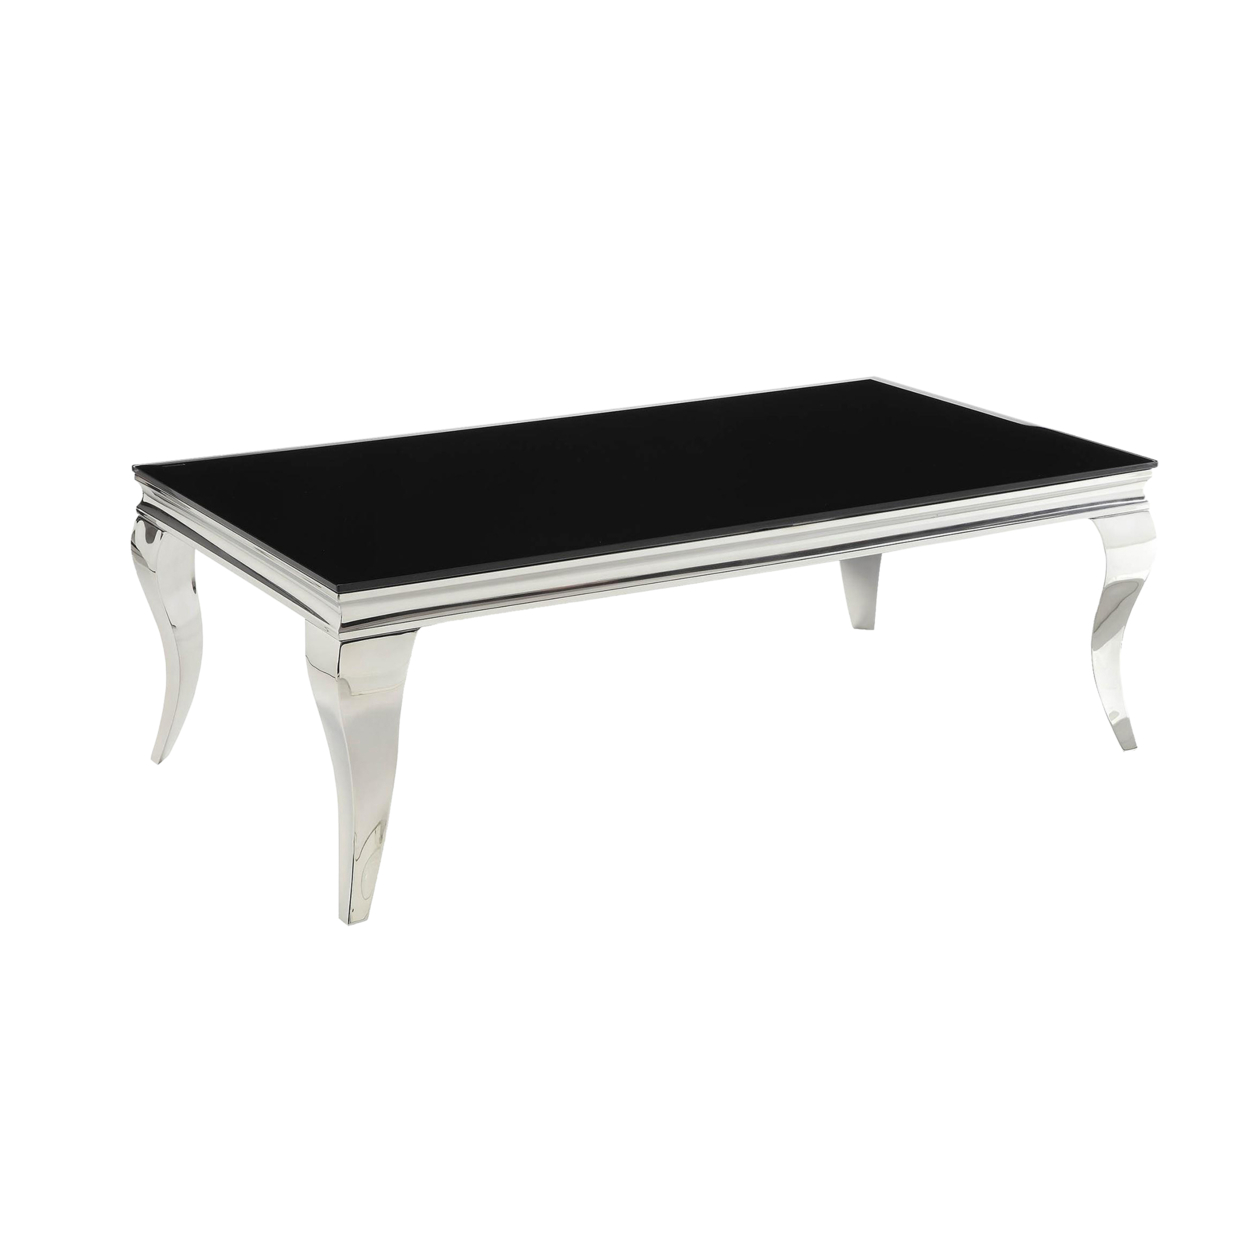 Modern Metal Frame Coffee Table With Beveled Glass Top, Black And Silver- Saltoro Sherpi